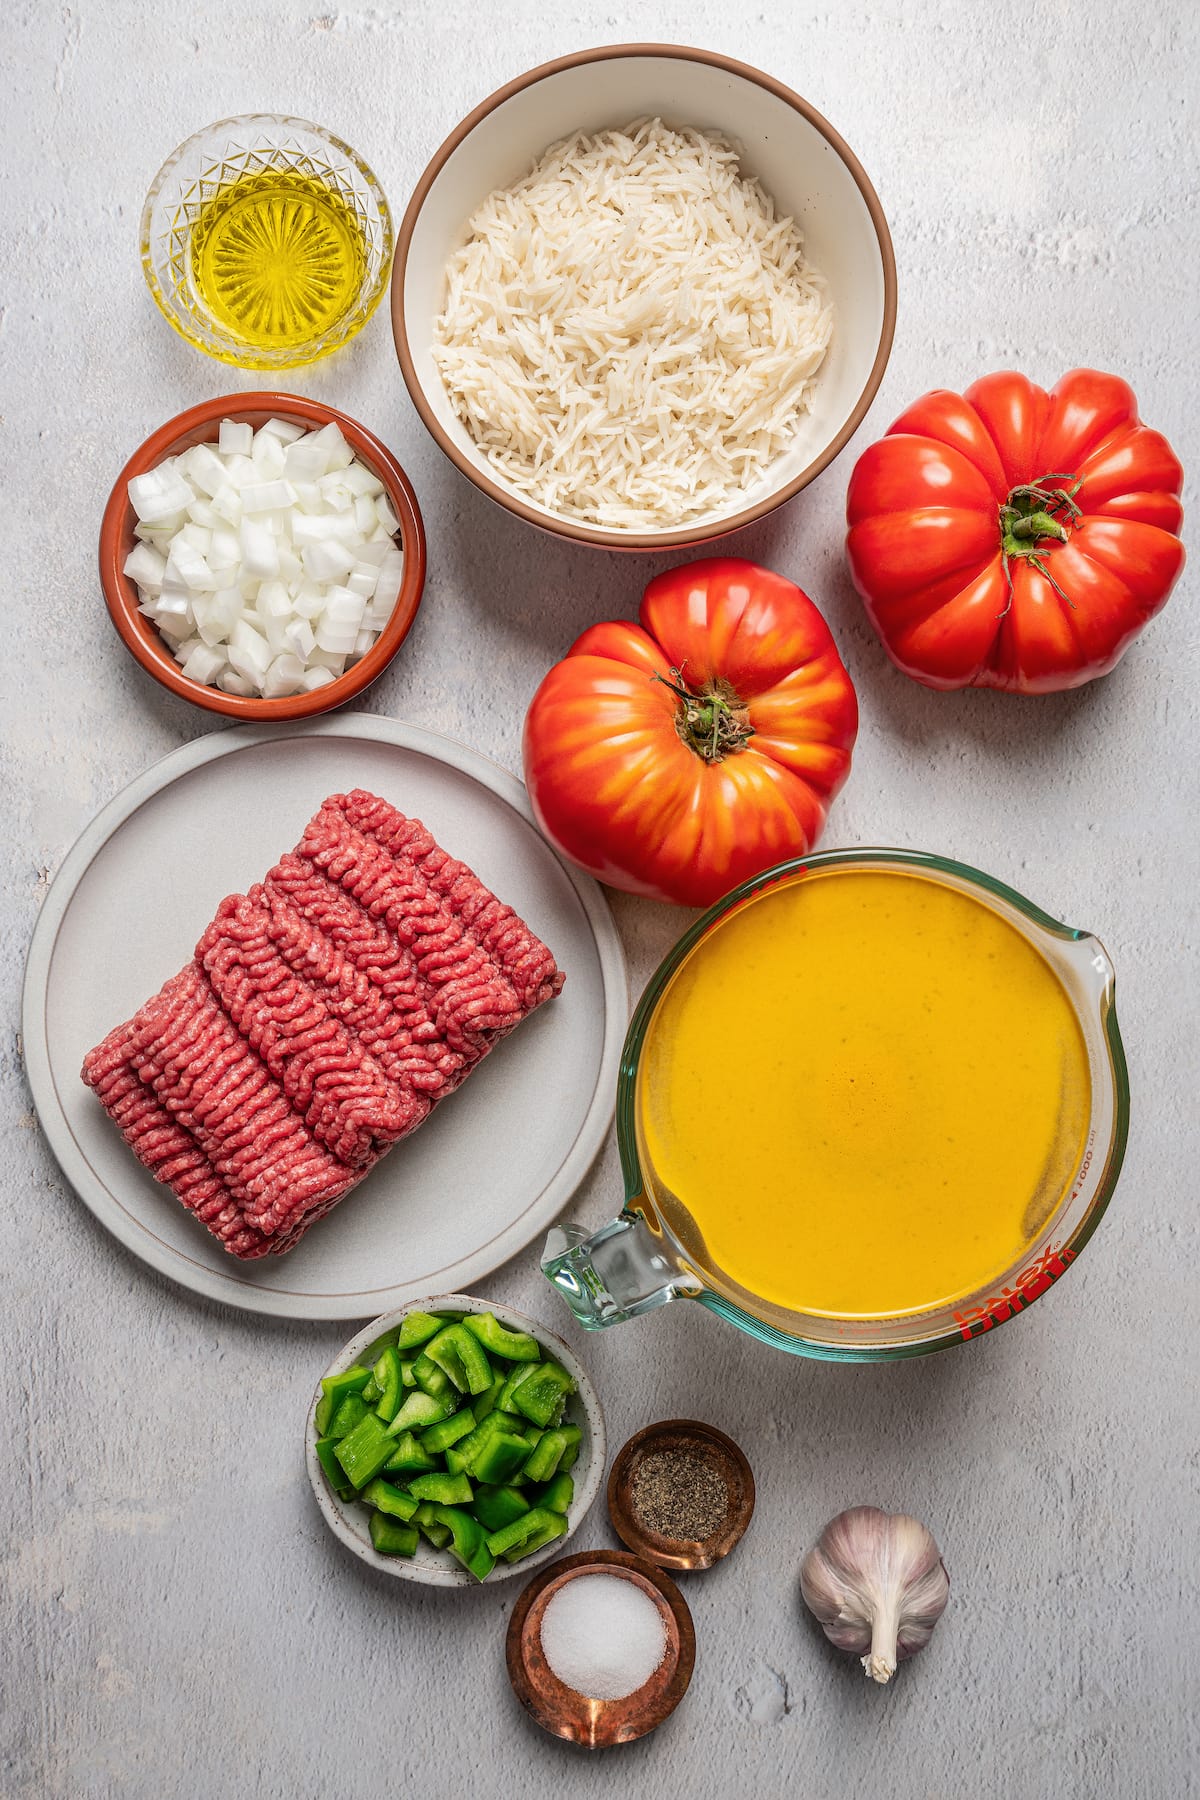 Ingredients for stuffed pepper soup.